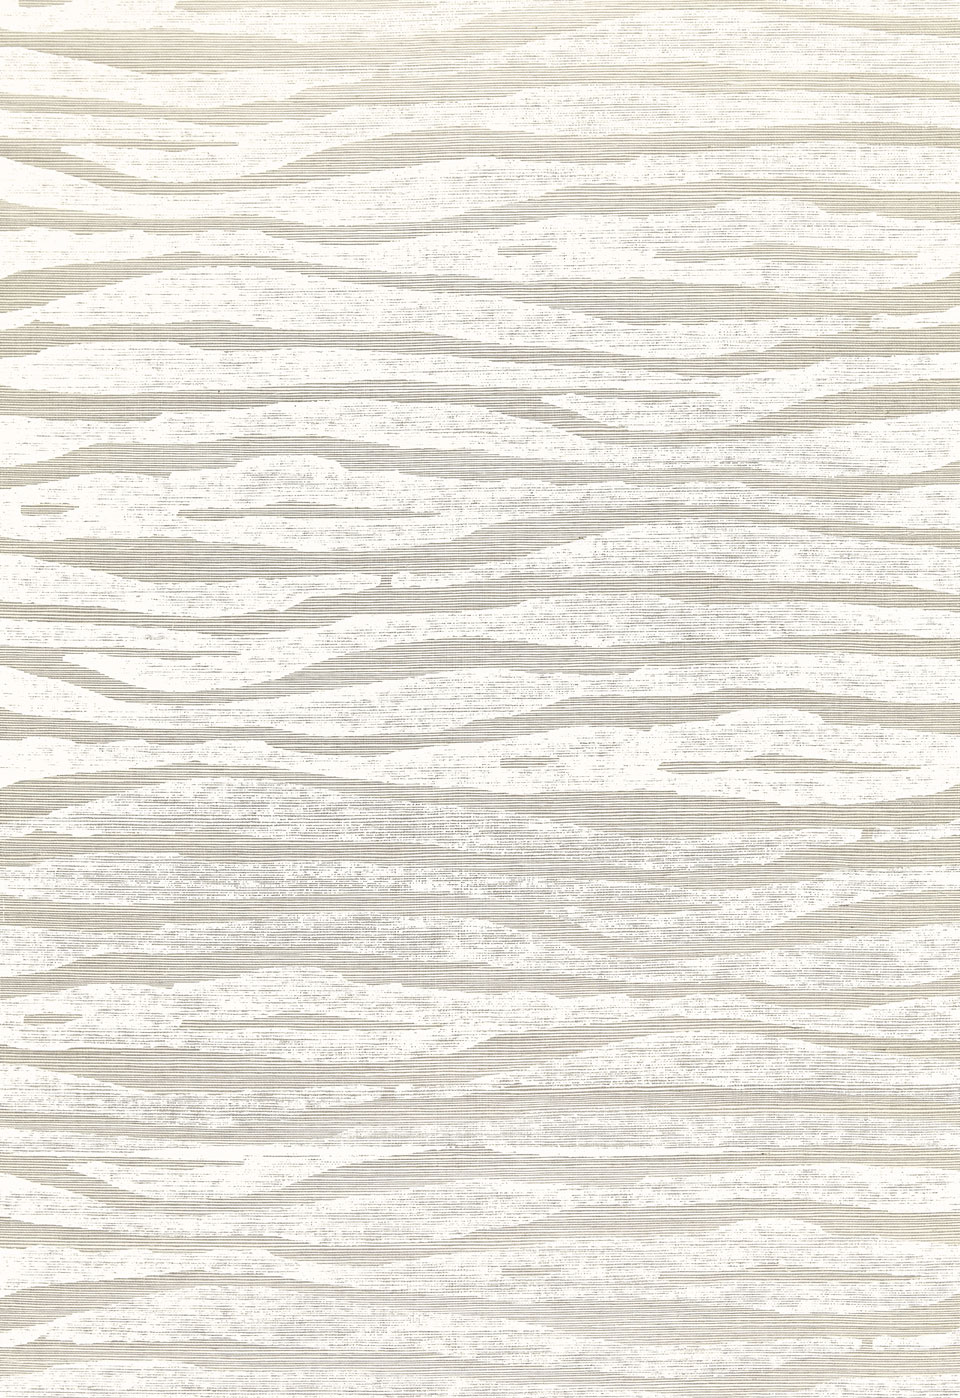 This Ripple In Fog Chalk Has A Sort Of Faux Bois Feel To It Don T You